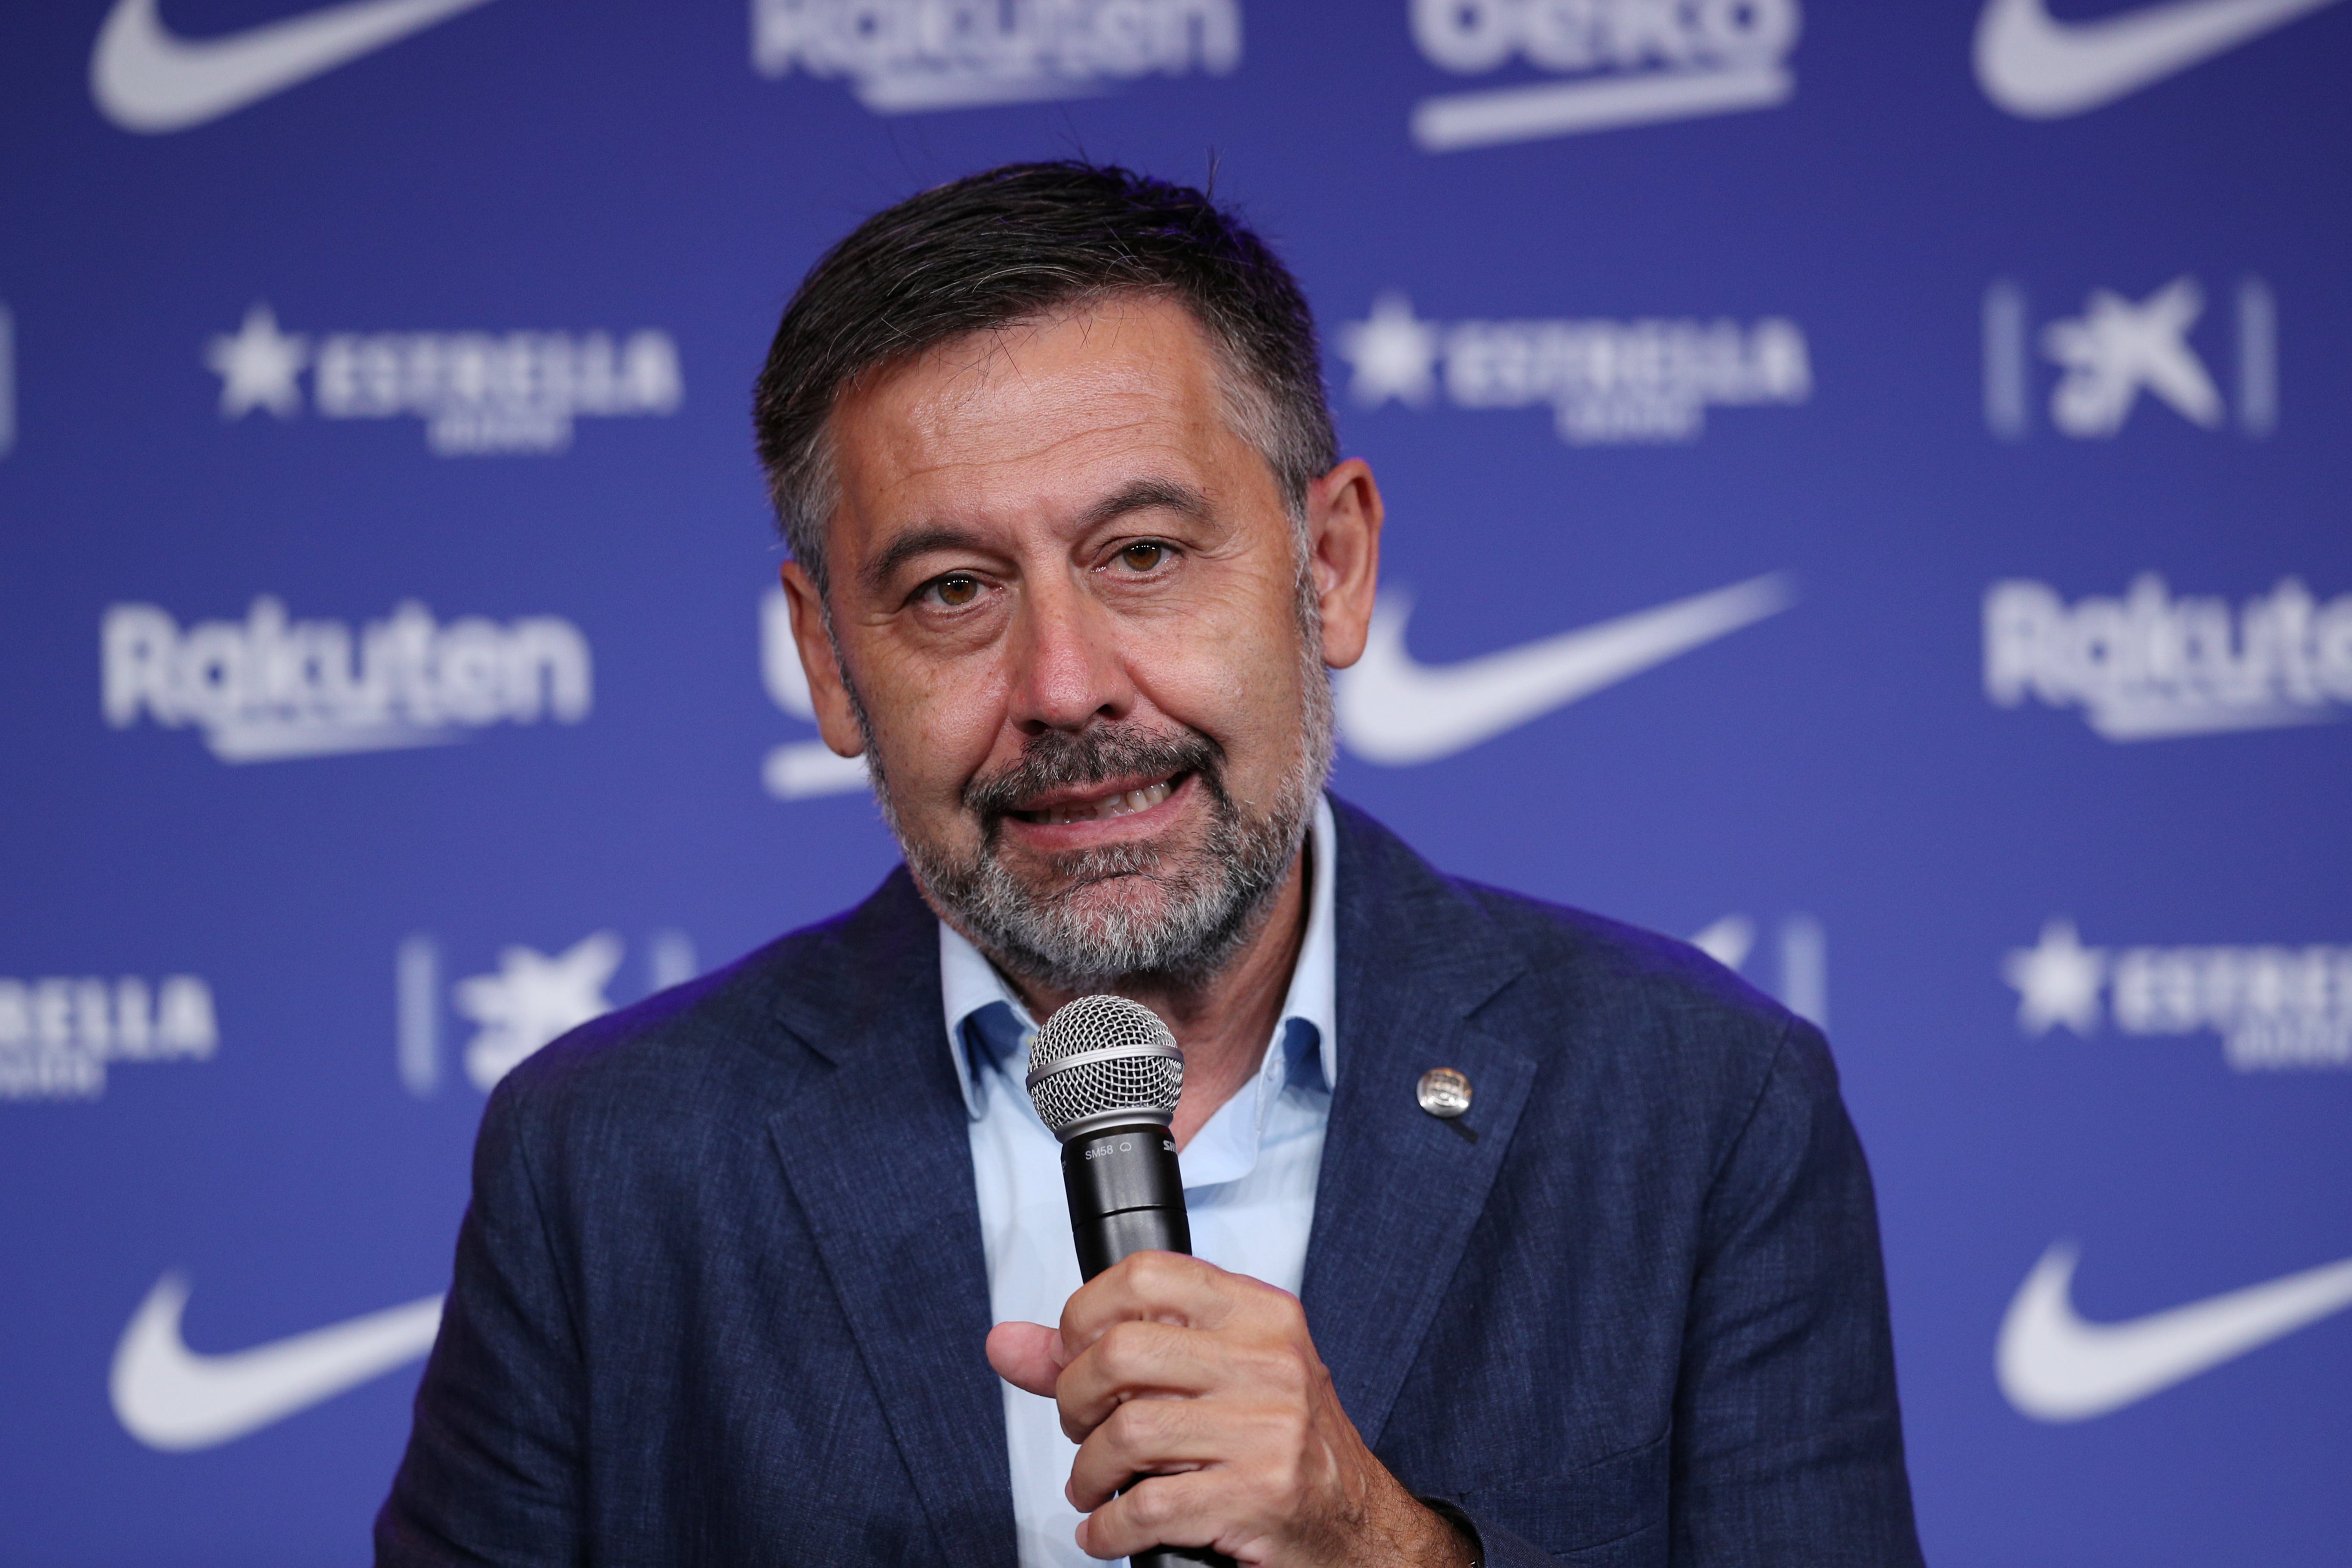 Josep Maria Bartomeu photographed at the unveiling of new signing Pedri in August, 2020 (by REUTERS/Albert Gea)